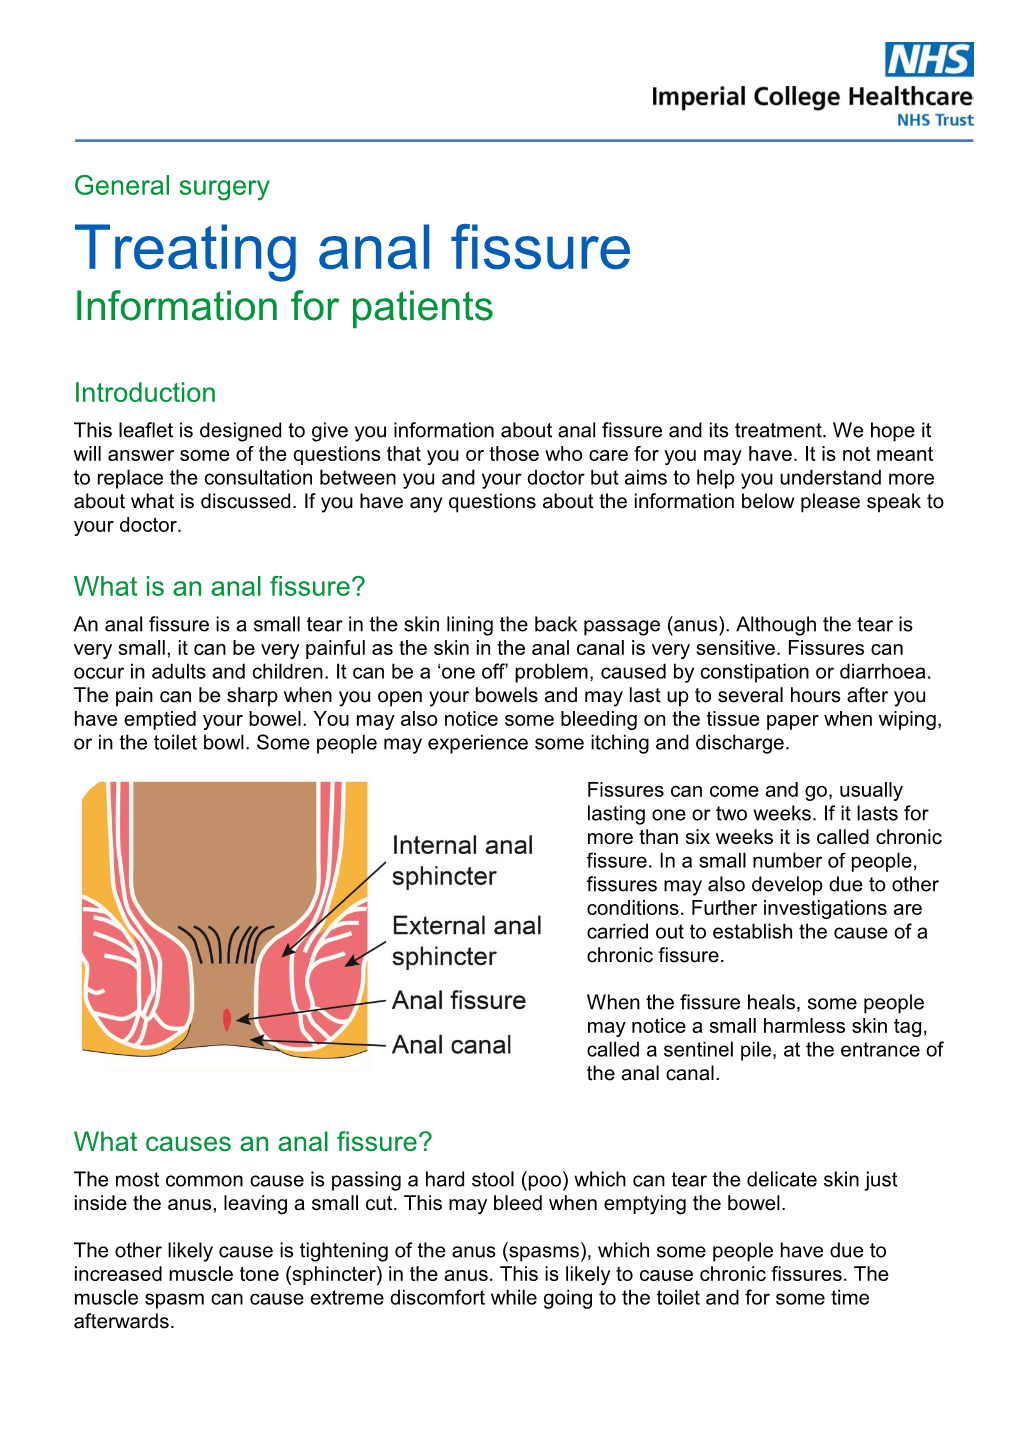 Treating Anal Fissure Information for Patients